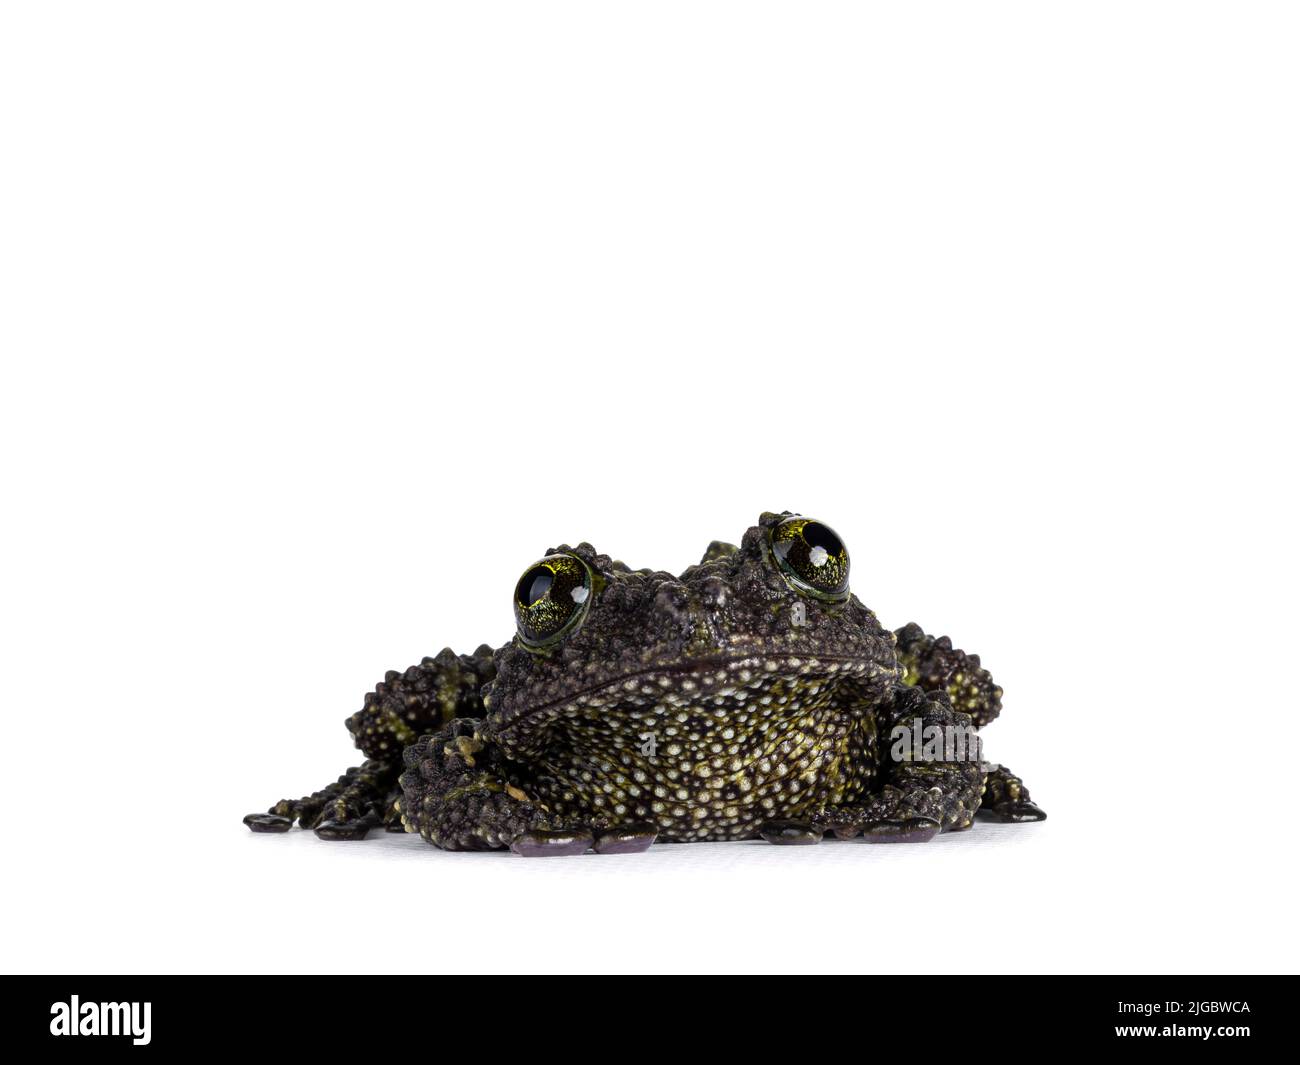 Mossy frog aka Theloderma corticale, sitting facing front. Isolated on a white background. Stock Photo